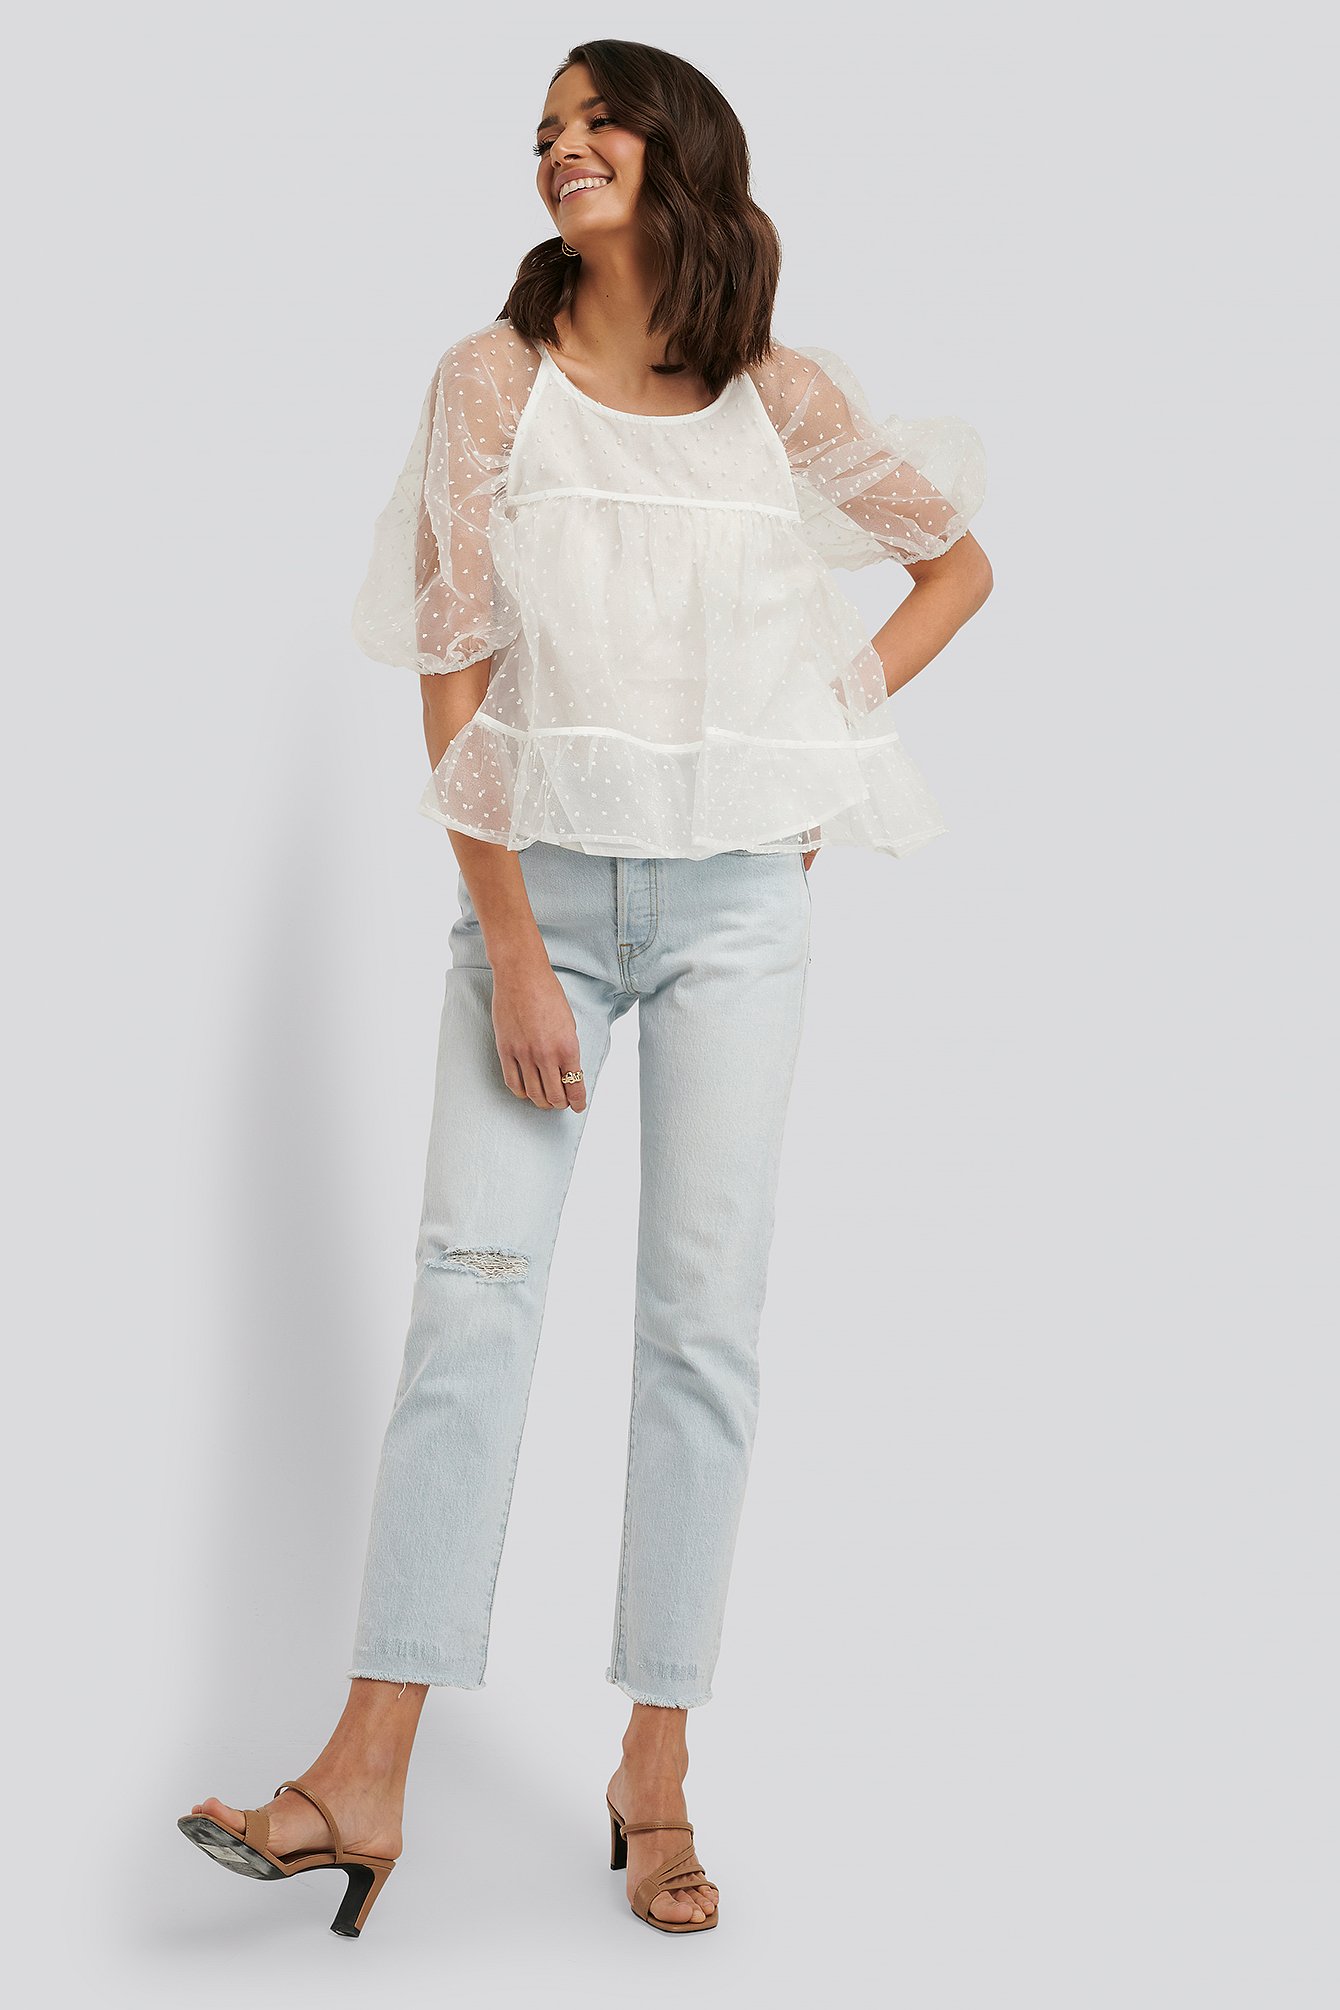 Dobby Organza Blouse Outfit